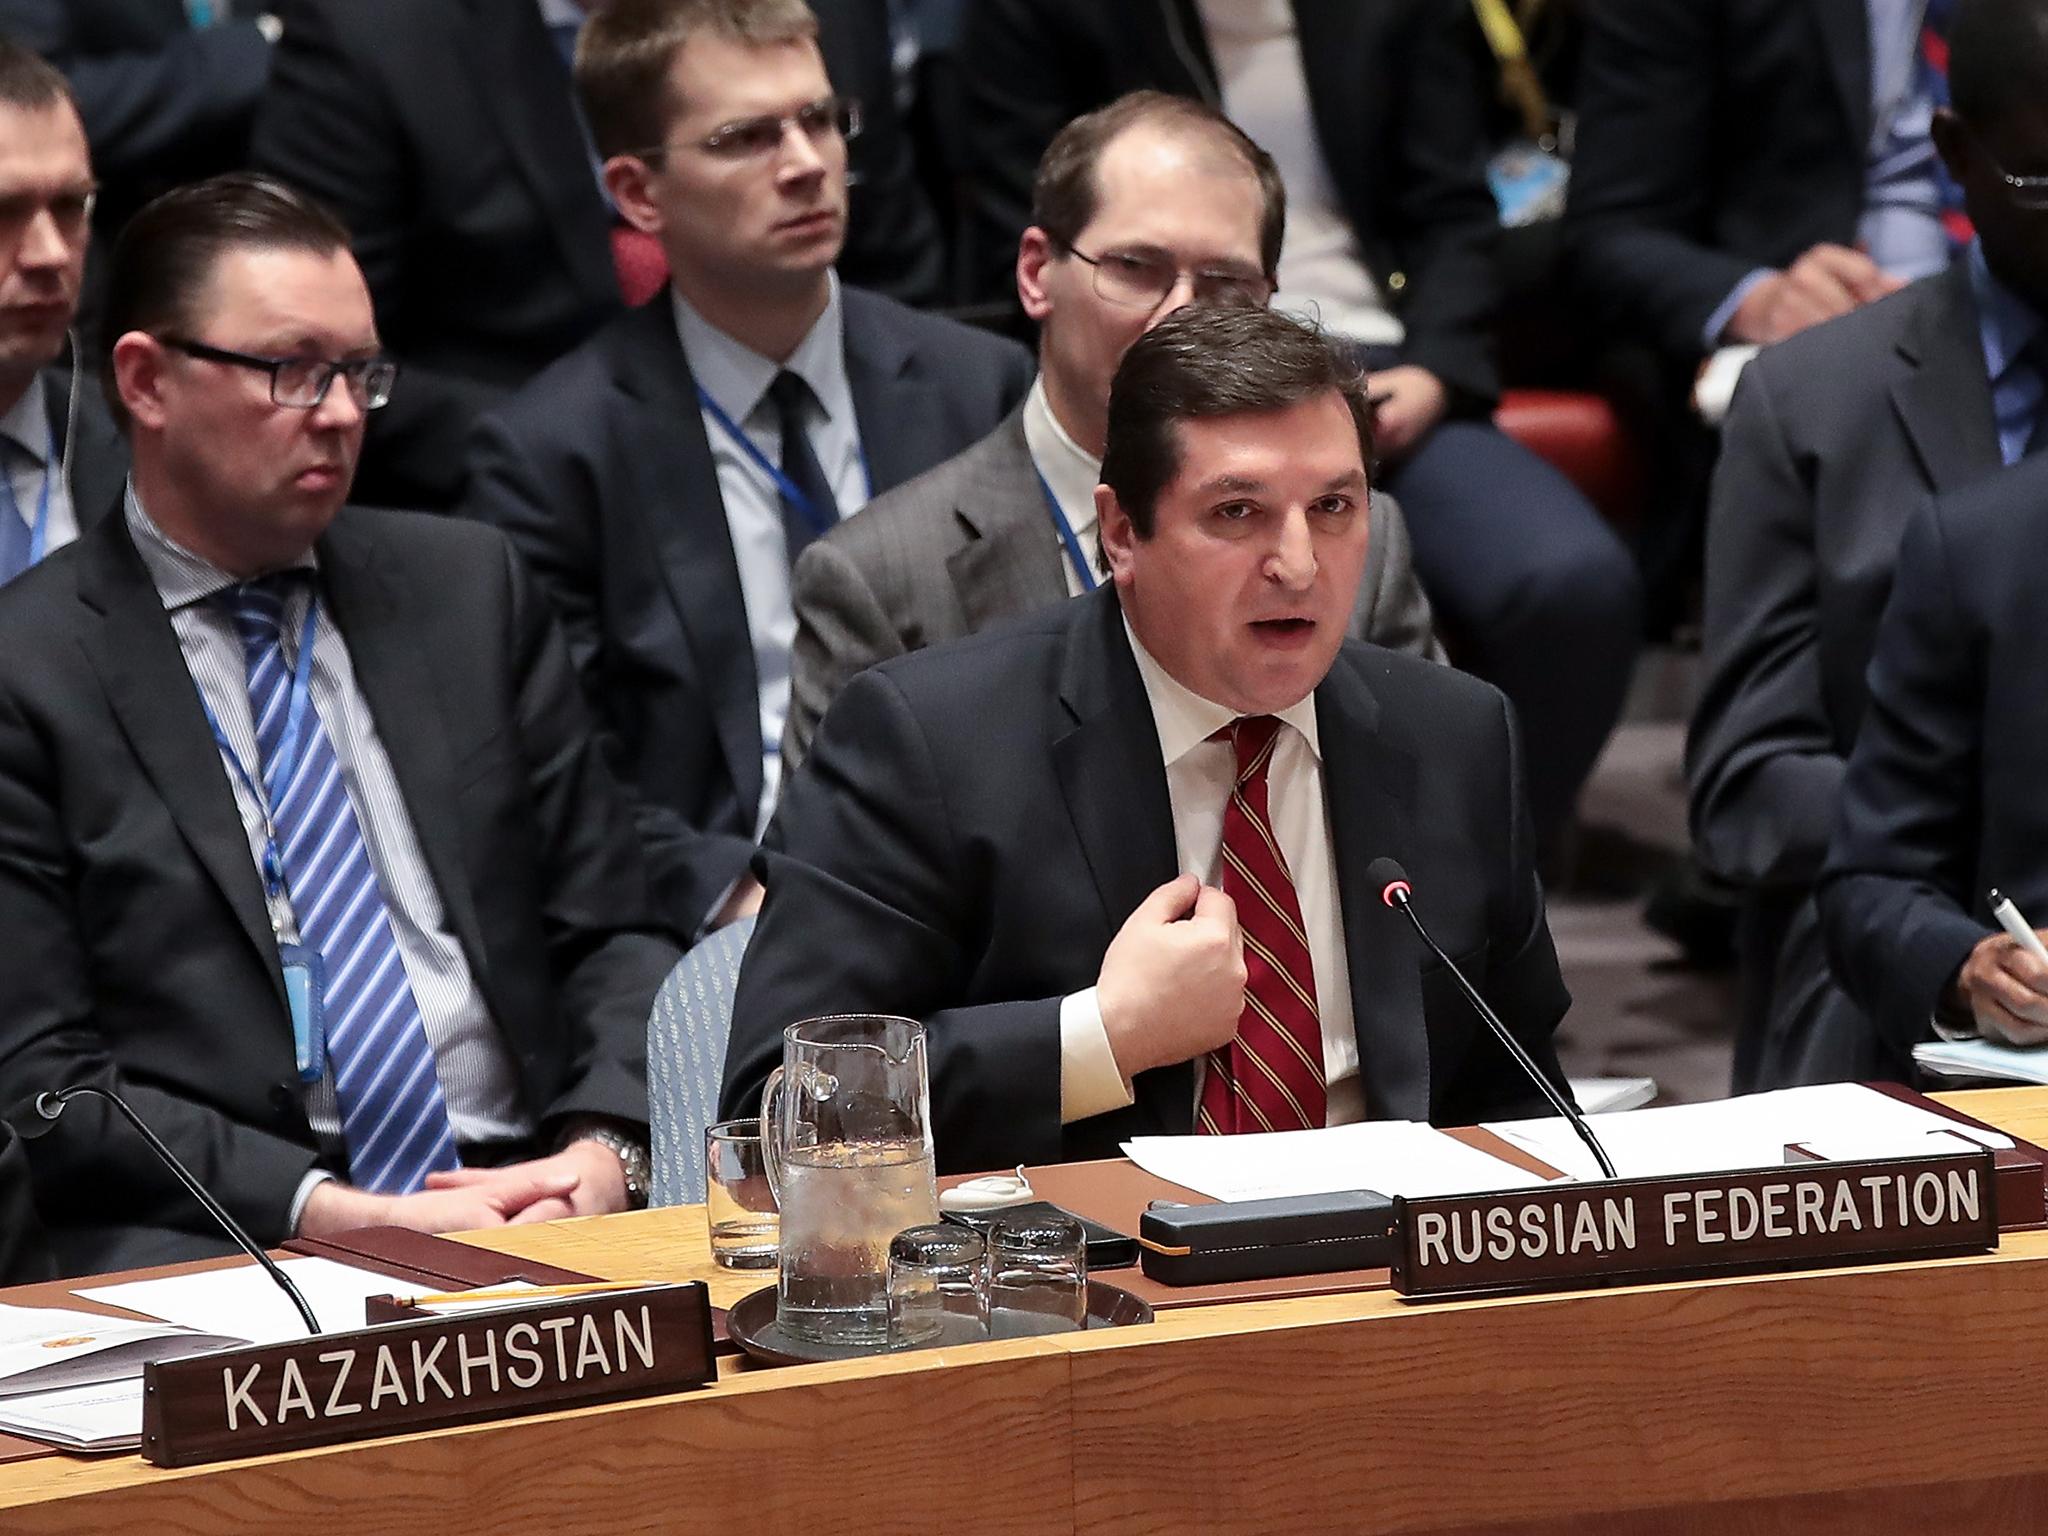 Russia's UN ambassador accused the UK of telling 'lies' on the issue of air strikes in Syria